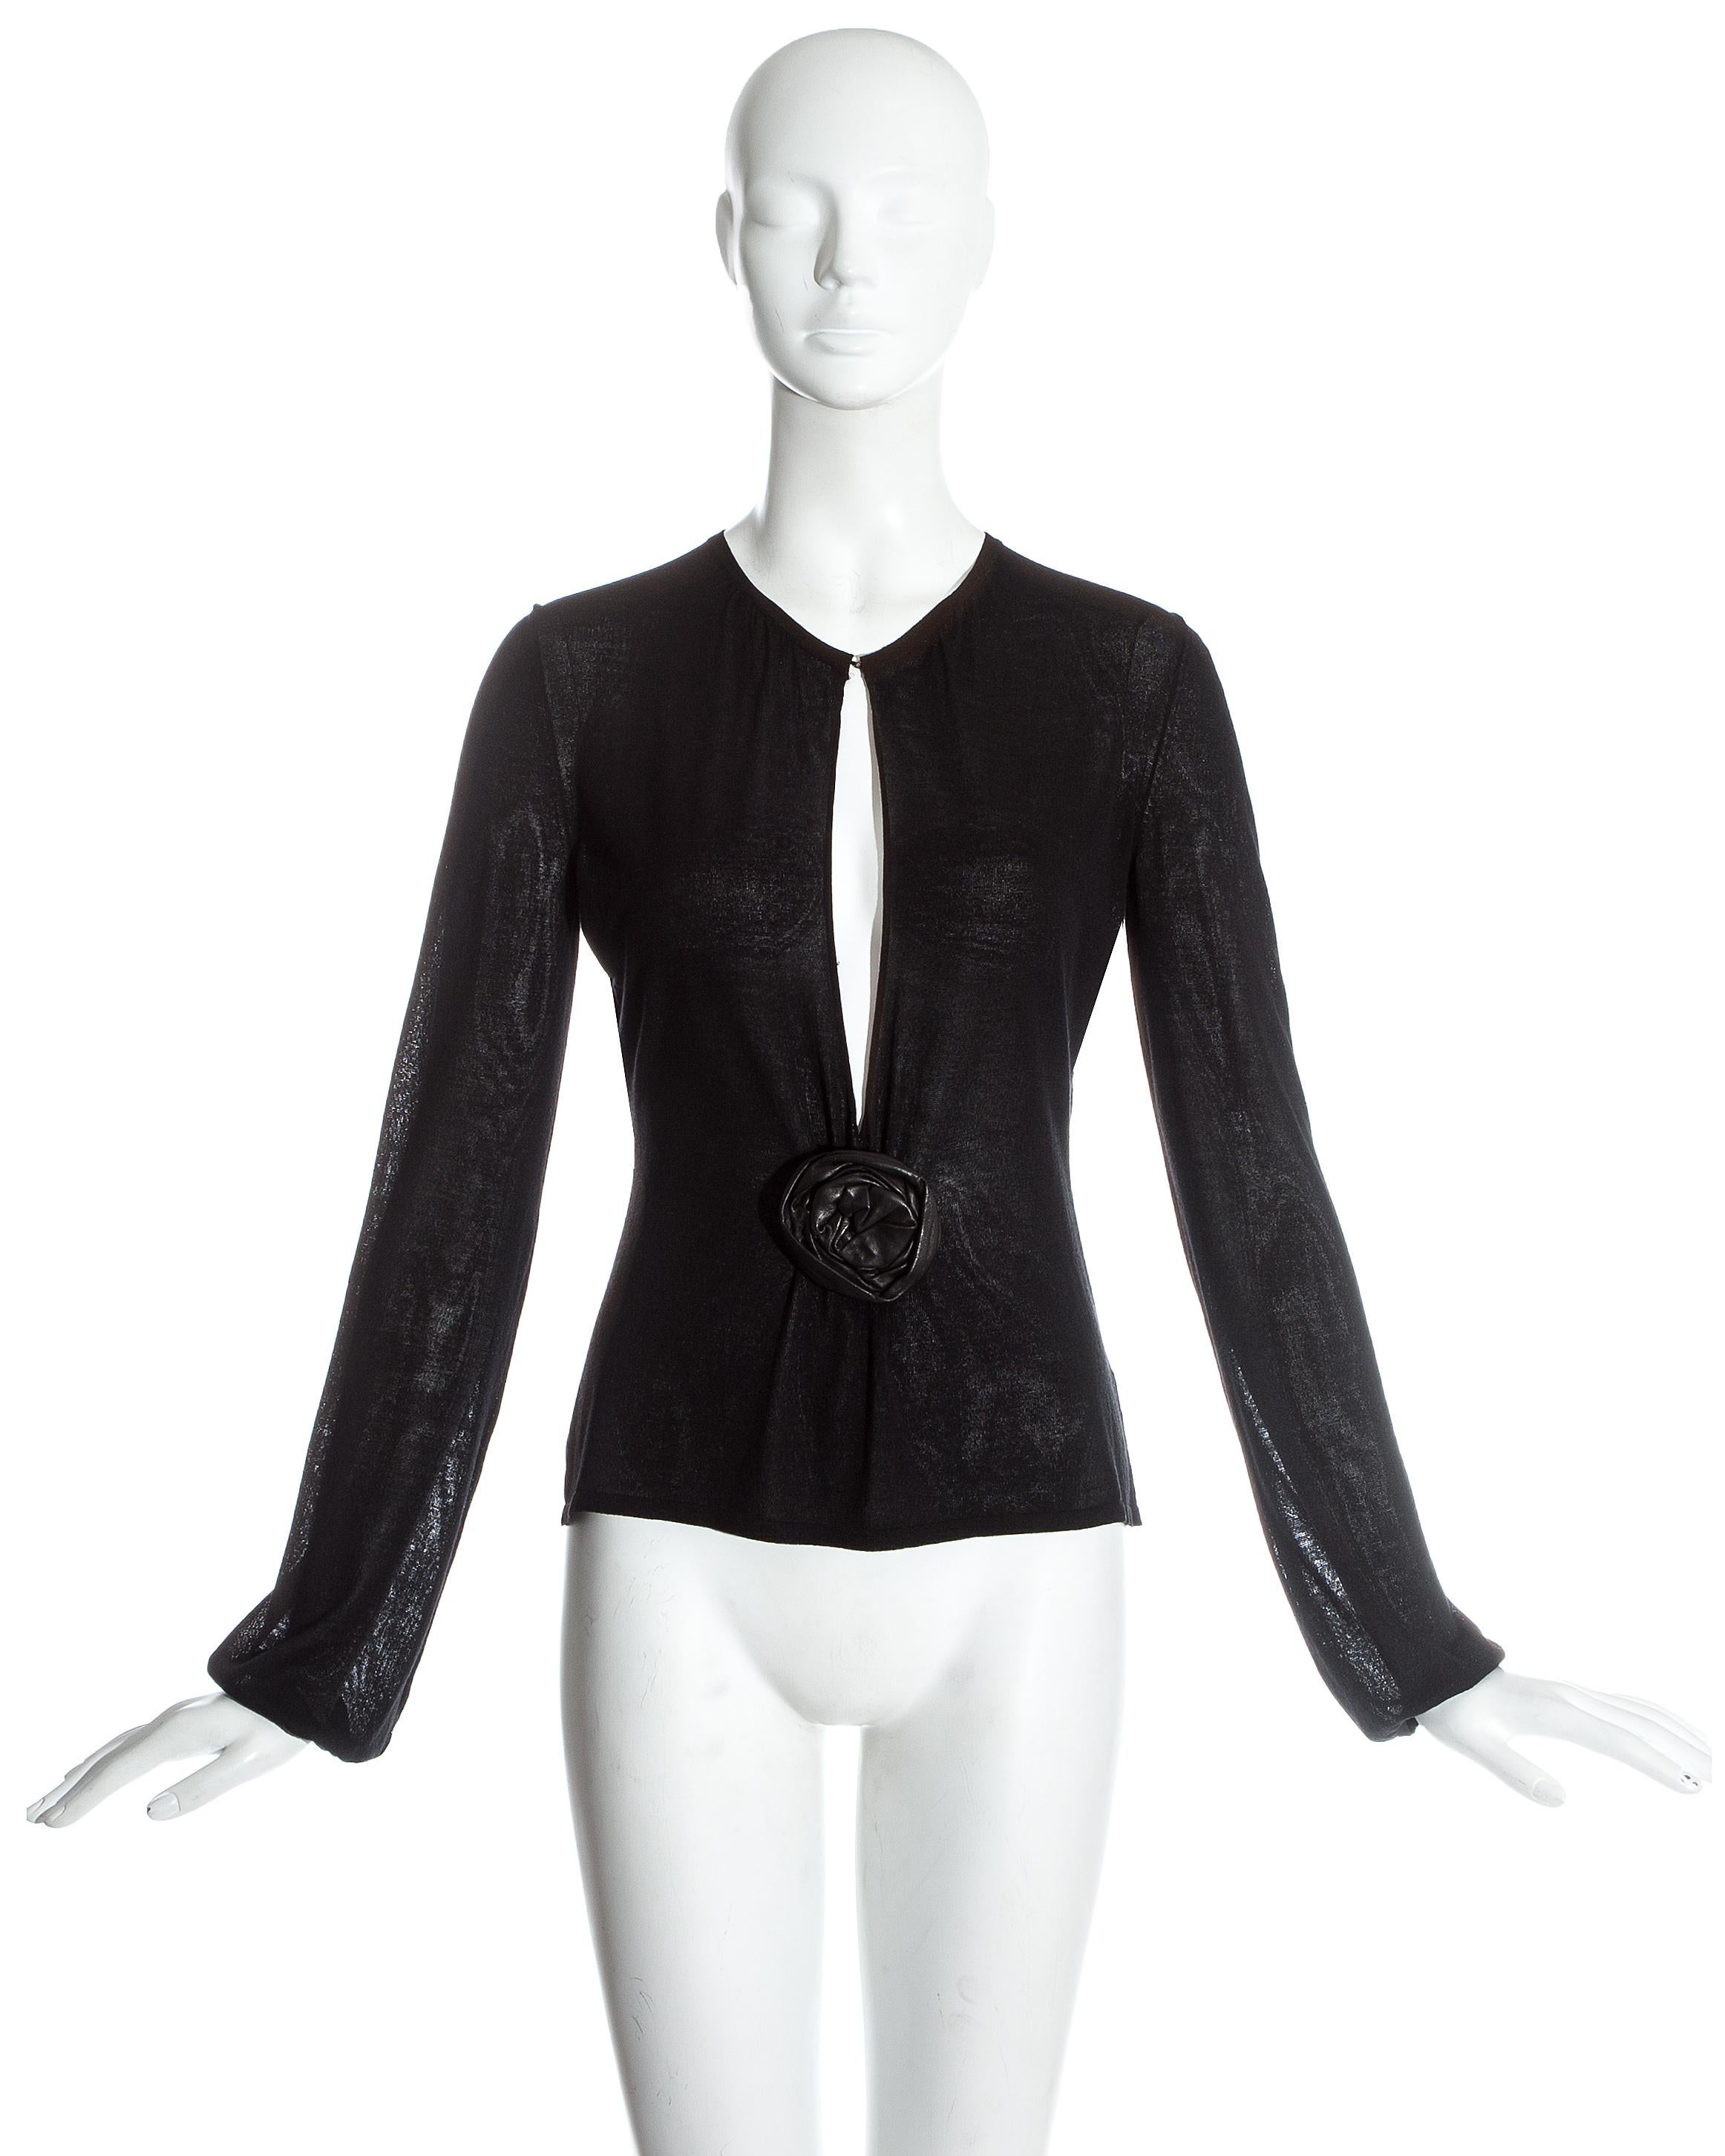 Gucci by Tom Ford black knitted evening blouse with peek-a-boo cleavage and leather rose

Fall-Winter 1999